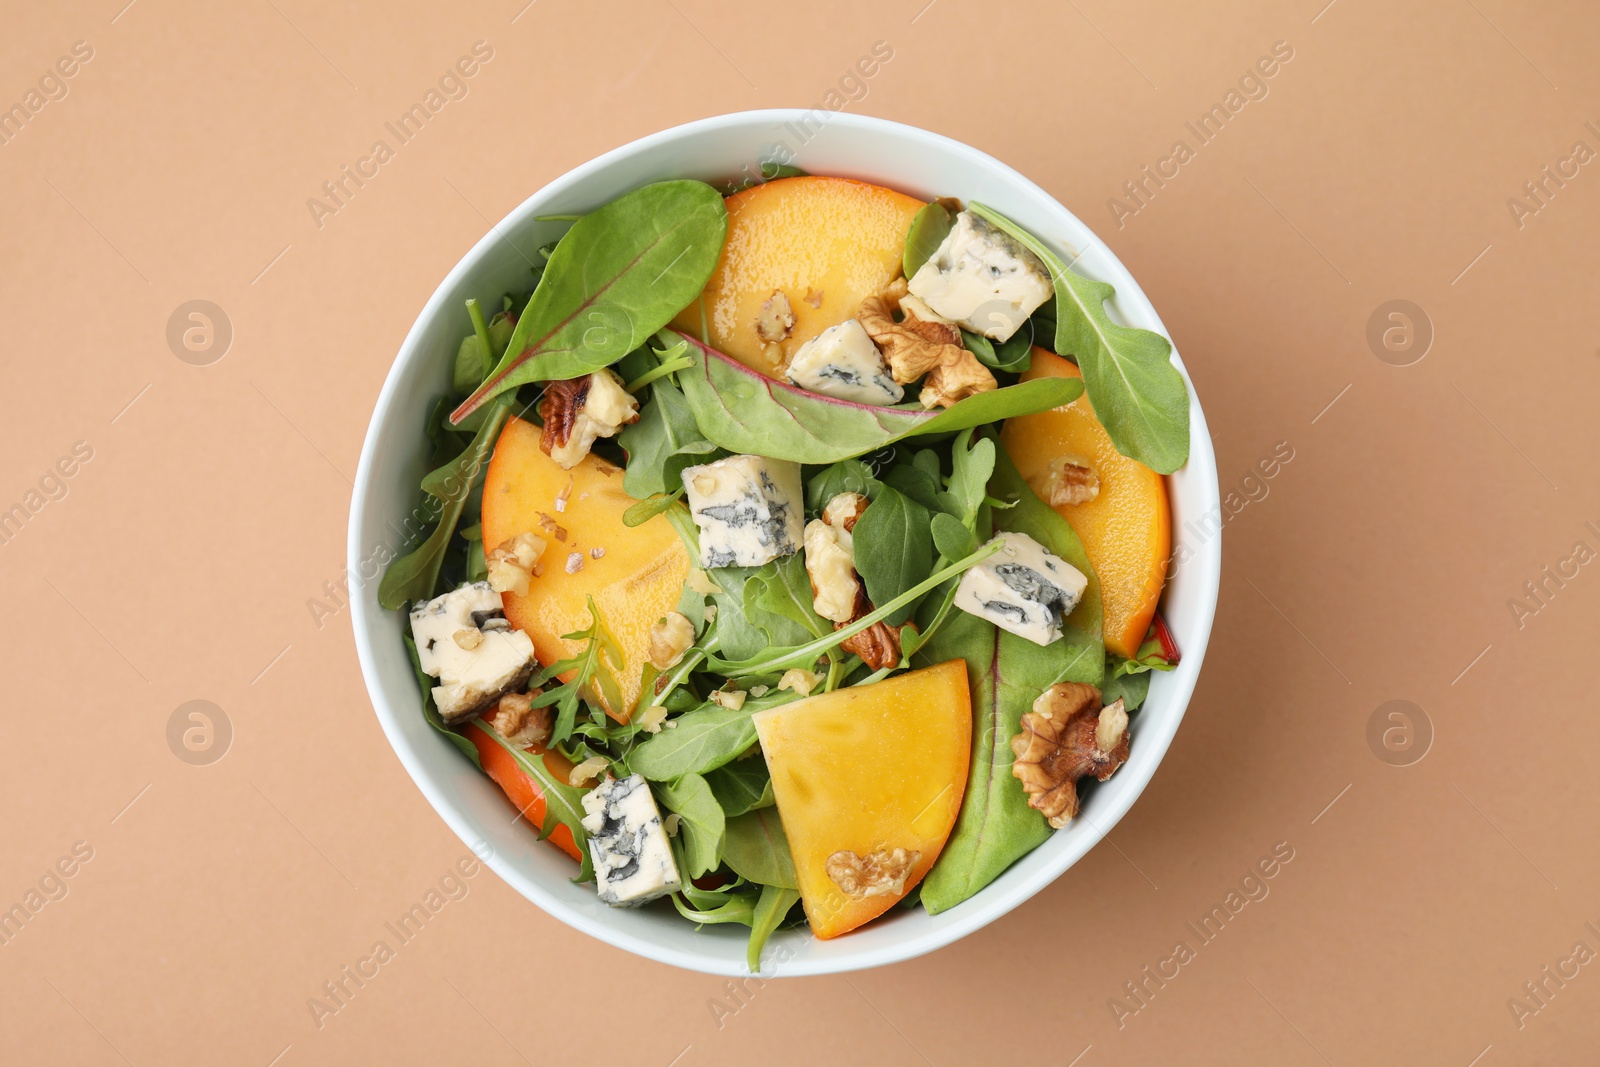 Photo of Tasty salad with persimmon, blue cheese and walnuts served on light brown background, top view